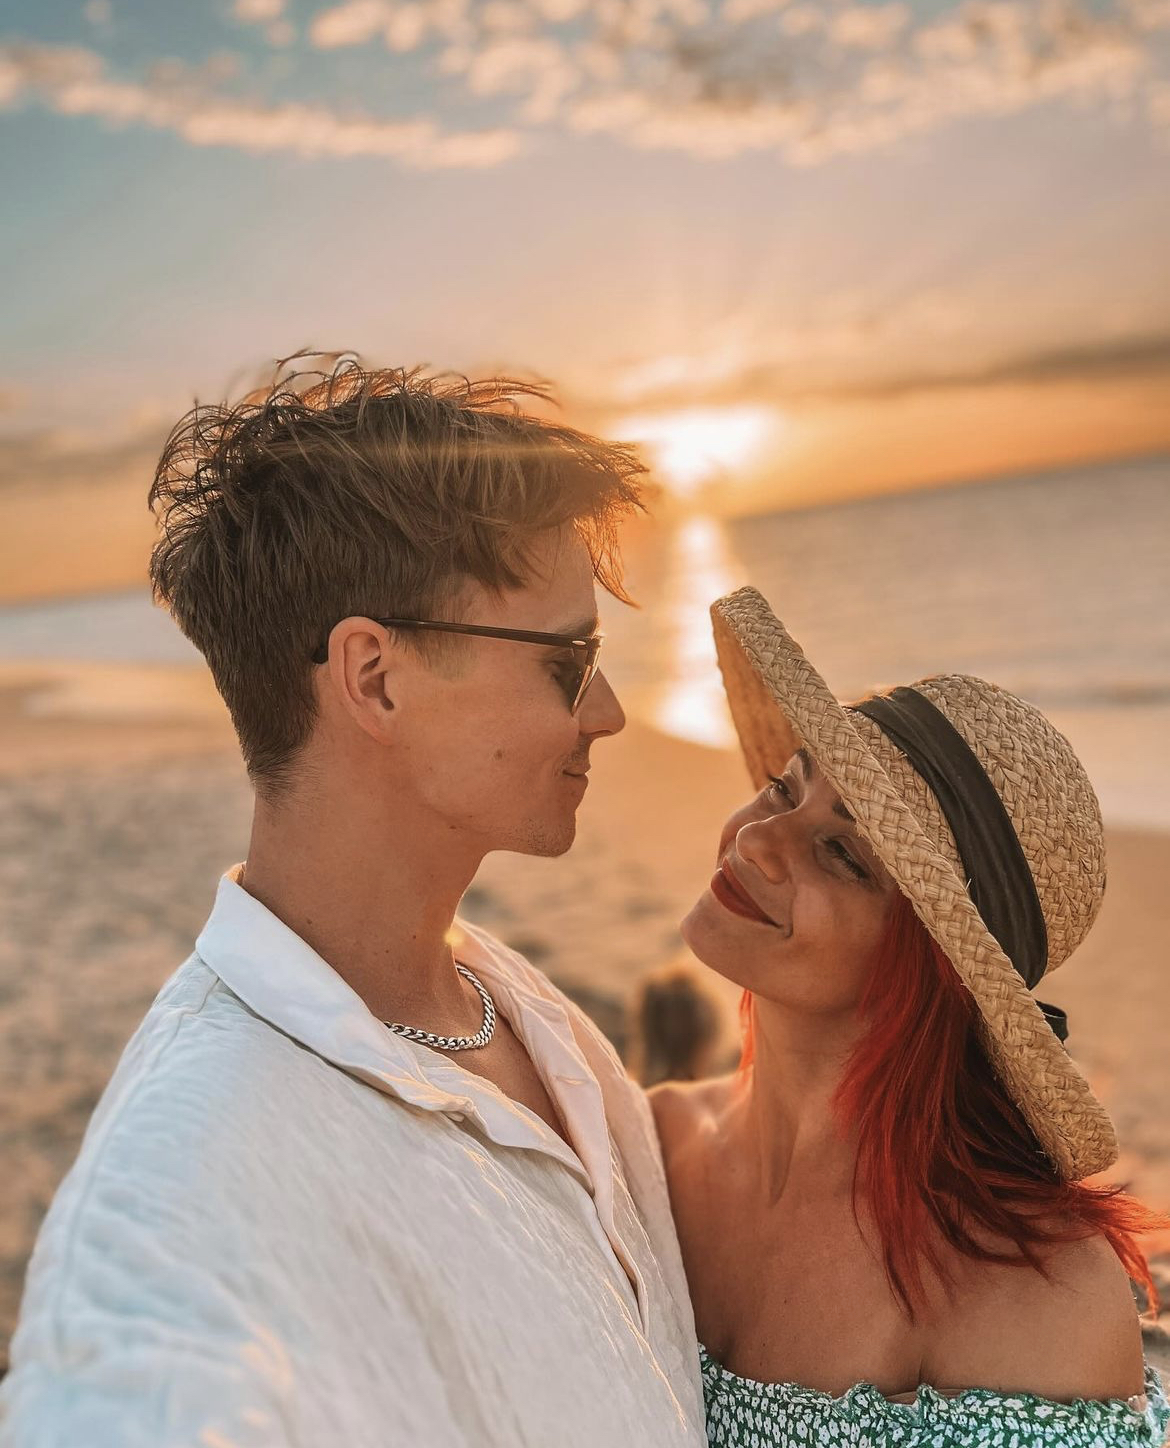 Strictly Fans Convinced Dianne Buswell is Secretly Engaged to Joe Sugg After Romantic Post